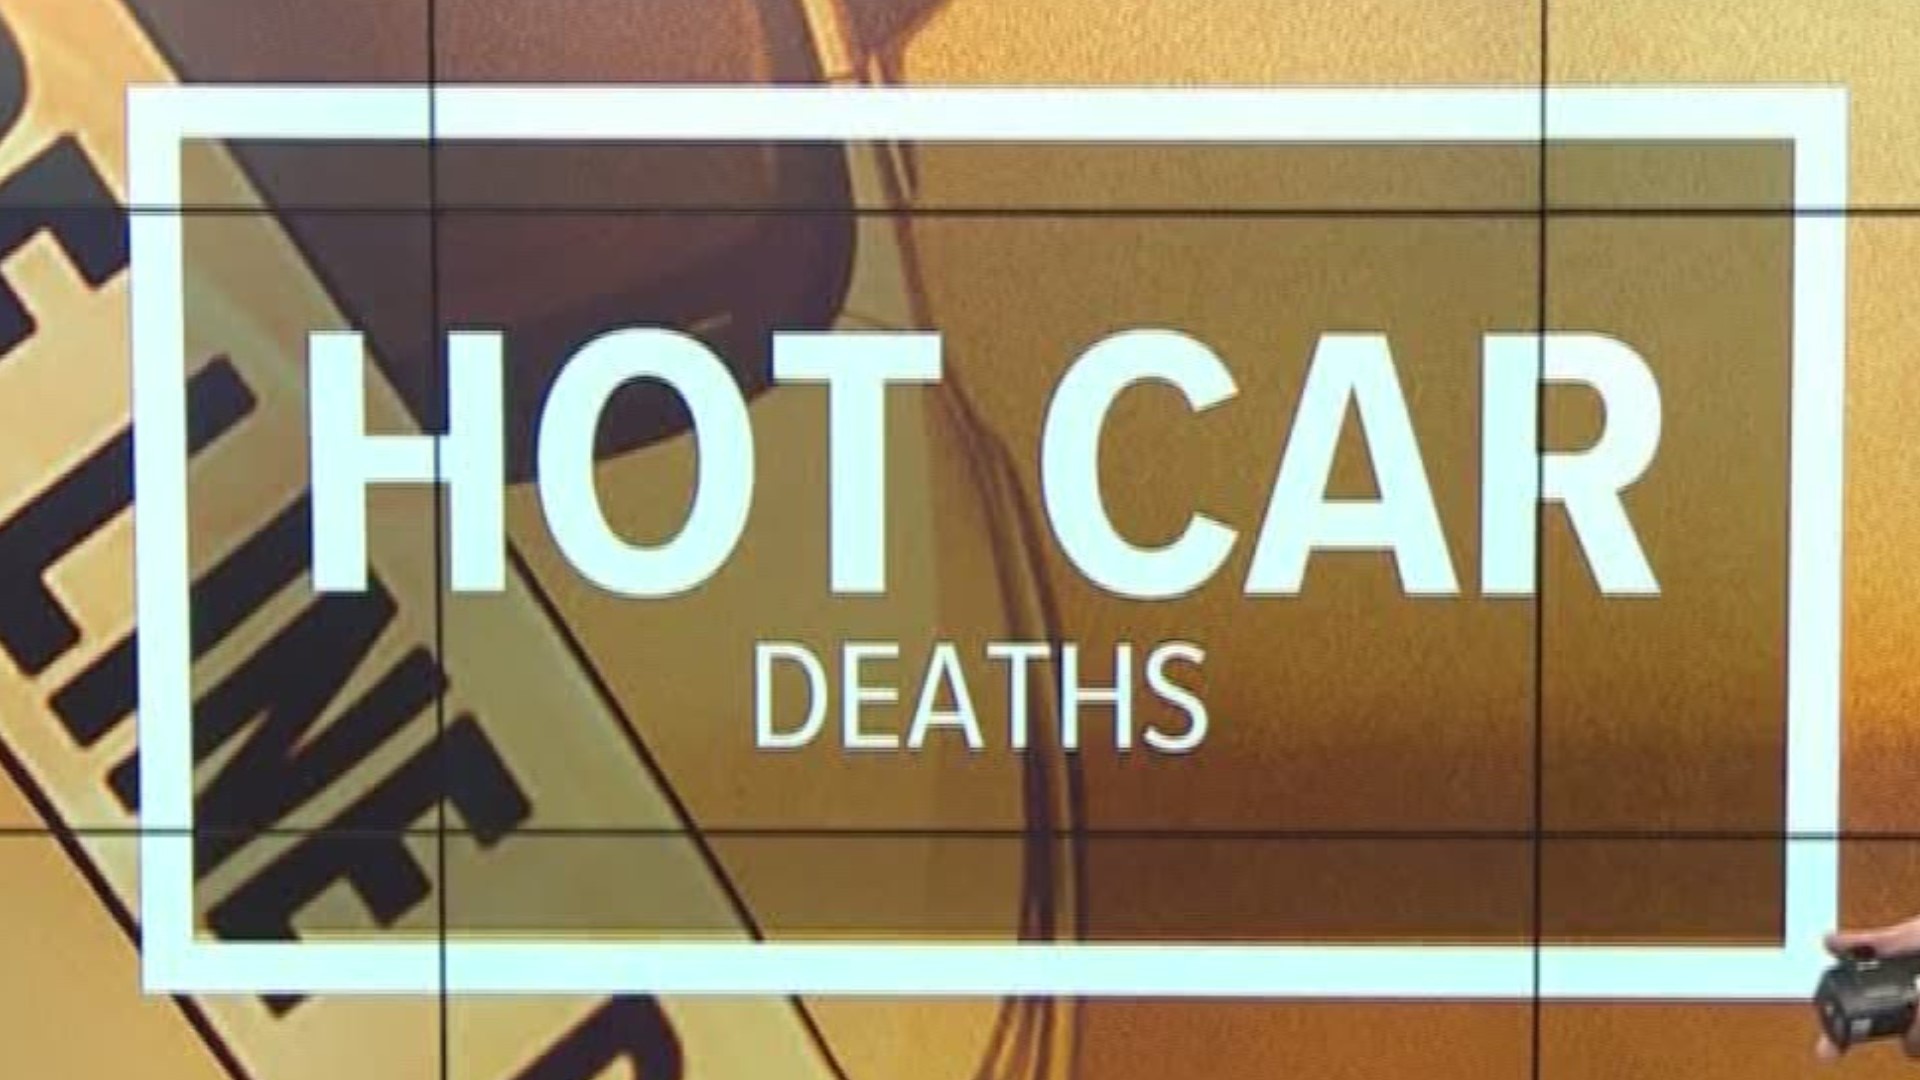 Two children have died after each was left in a hot car in Texas this past week. These are two of many deaths that have taken place this year.